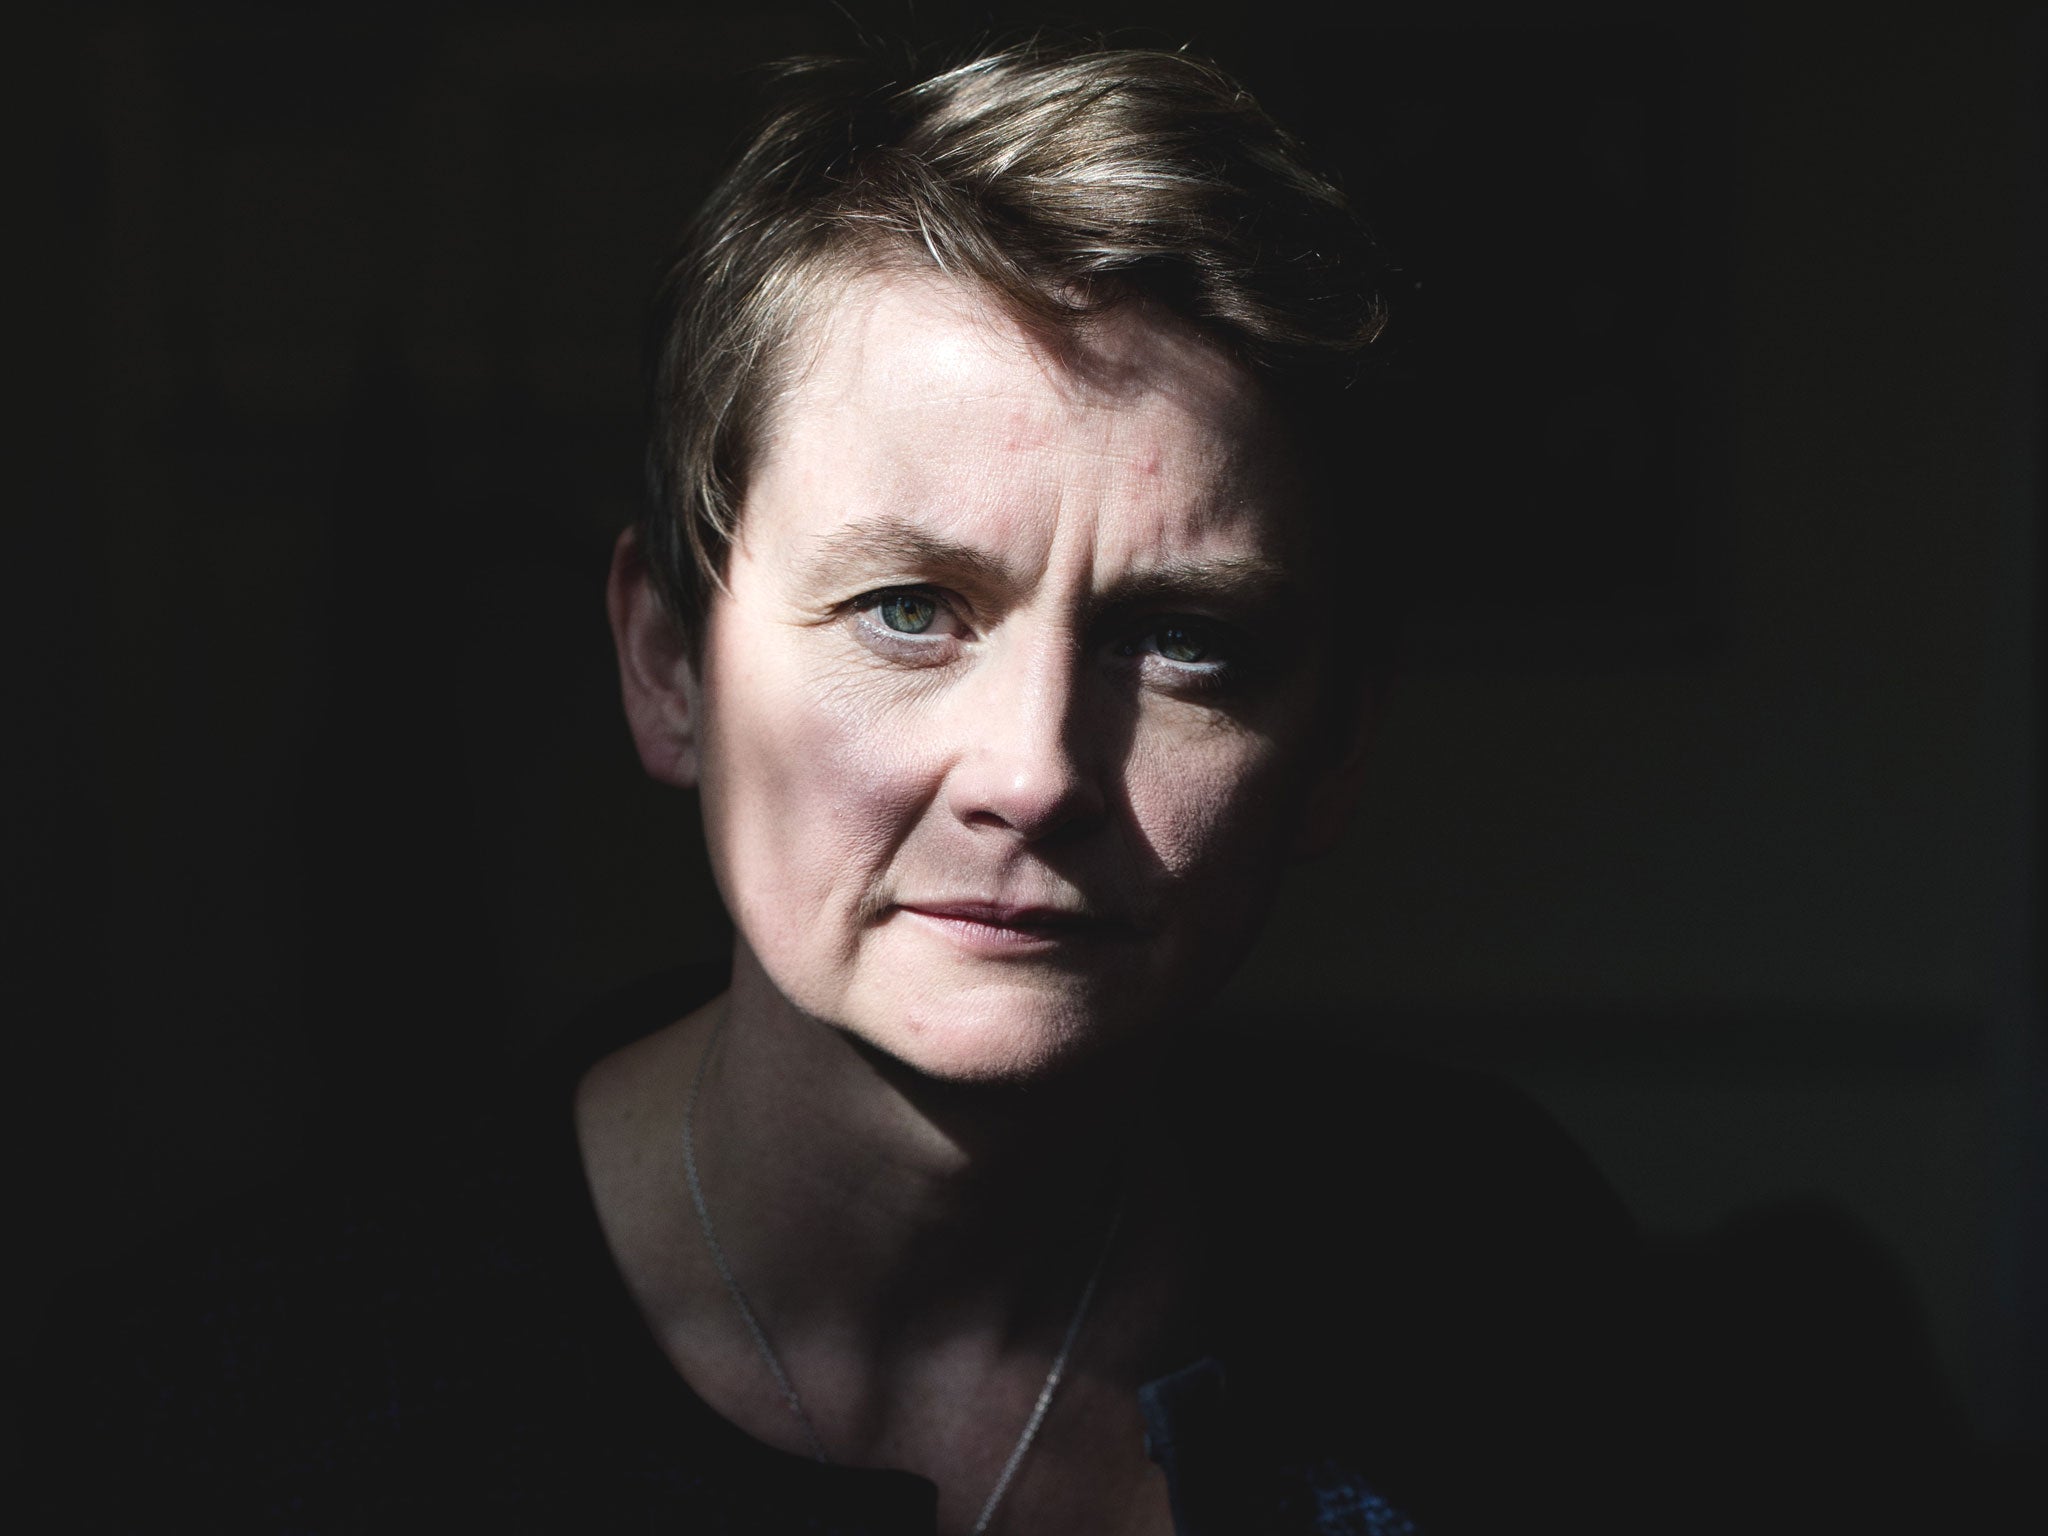 Yvette Cooper: I’m sure there will be a female Labour leader in future. Right now, let’s get Ed elected